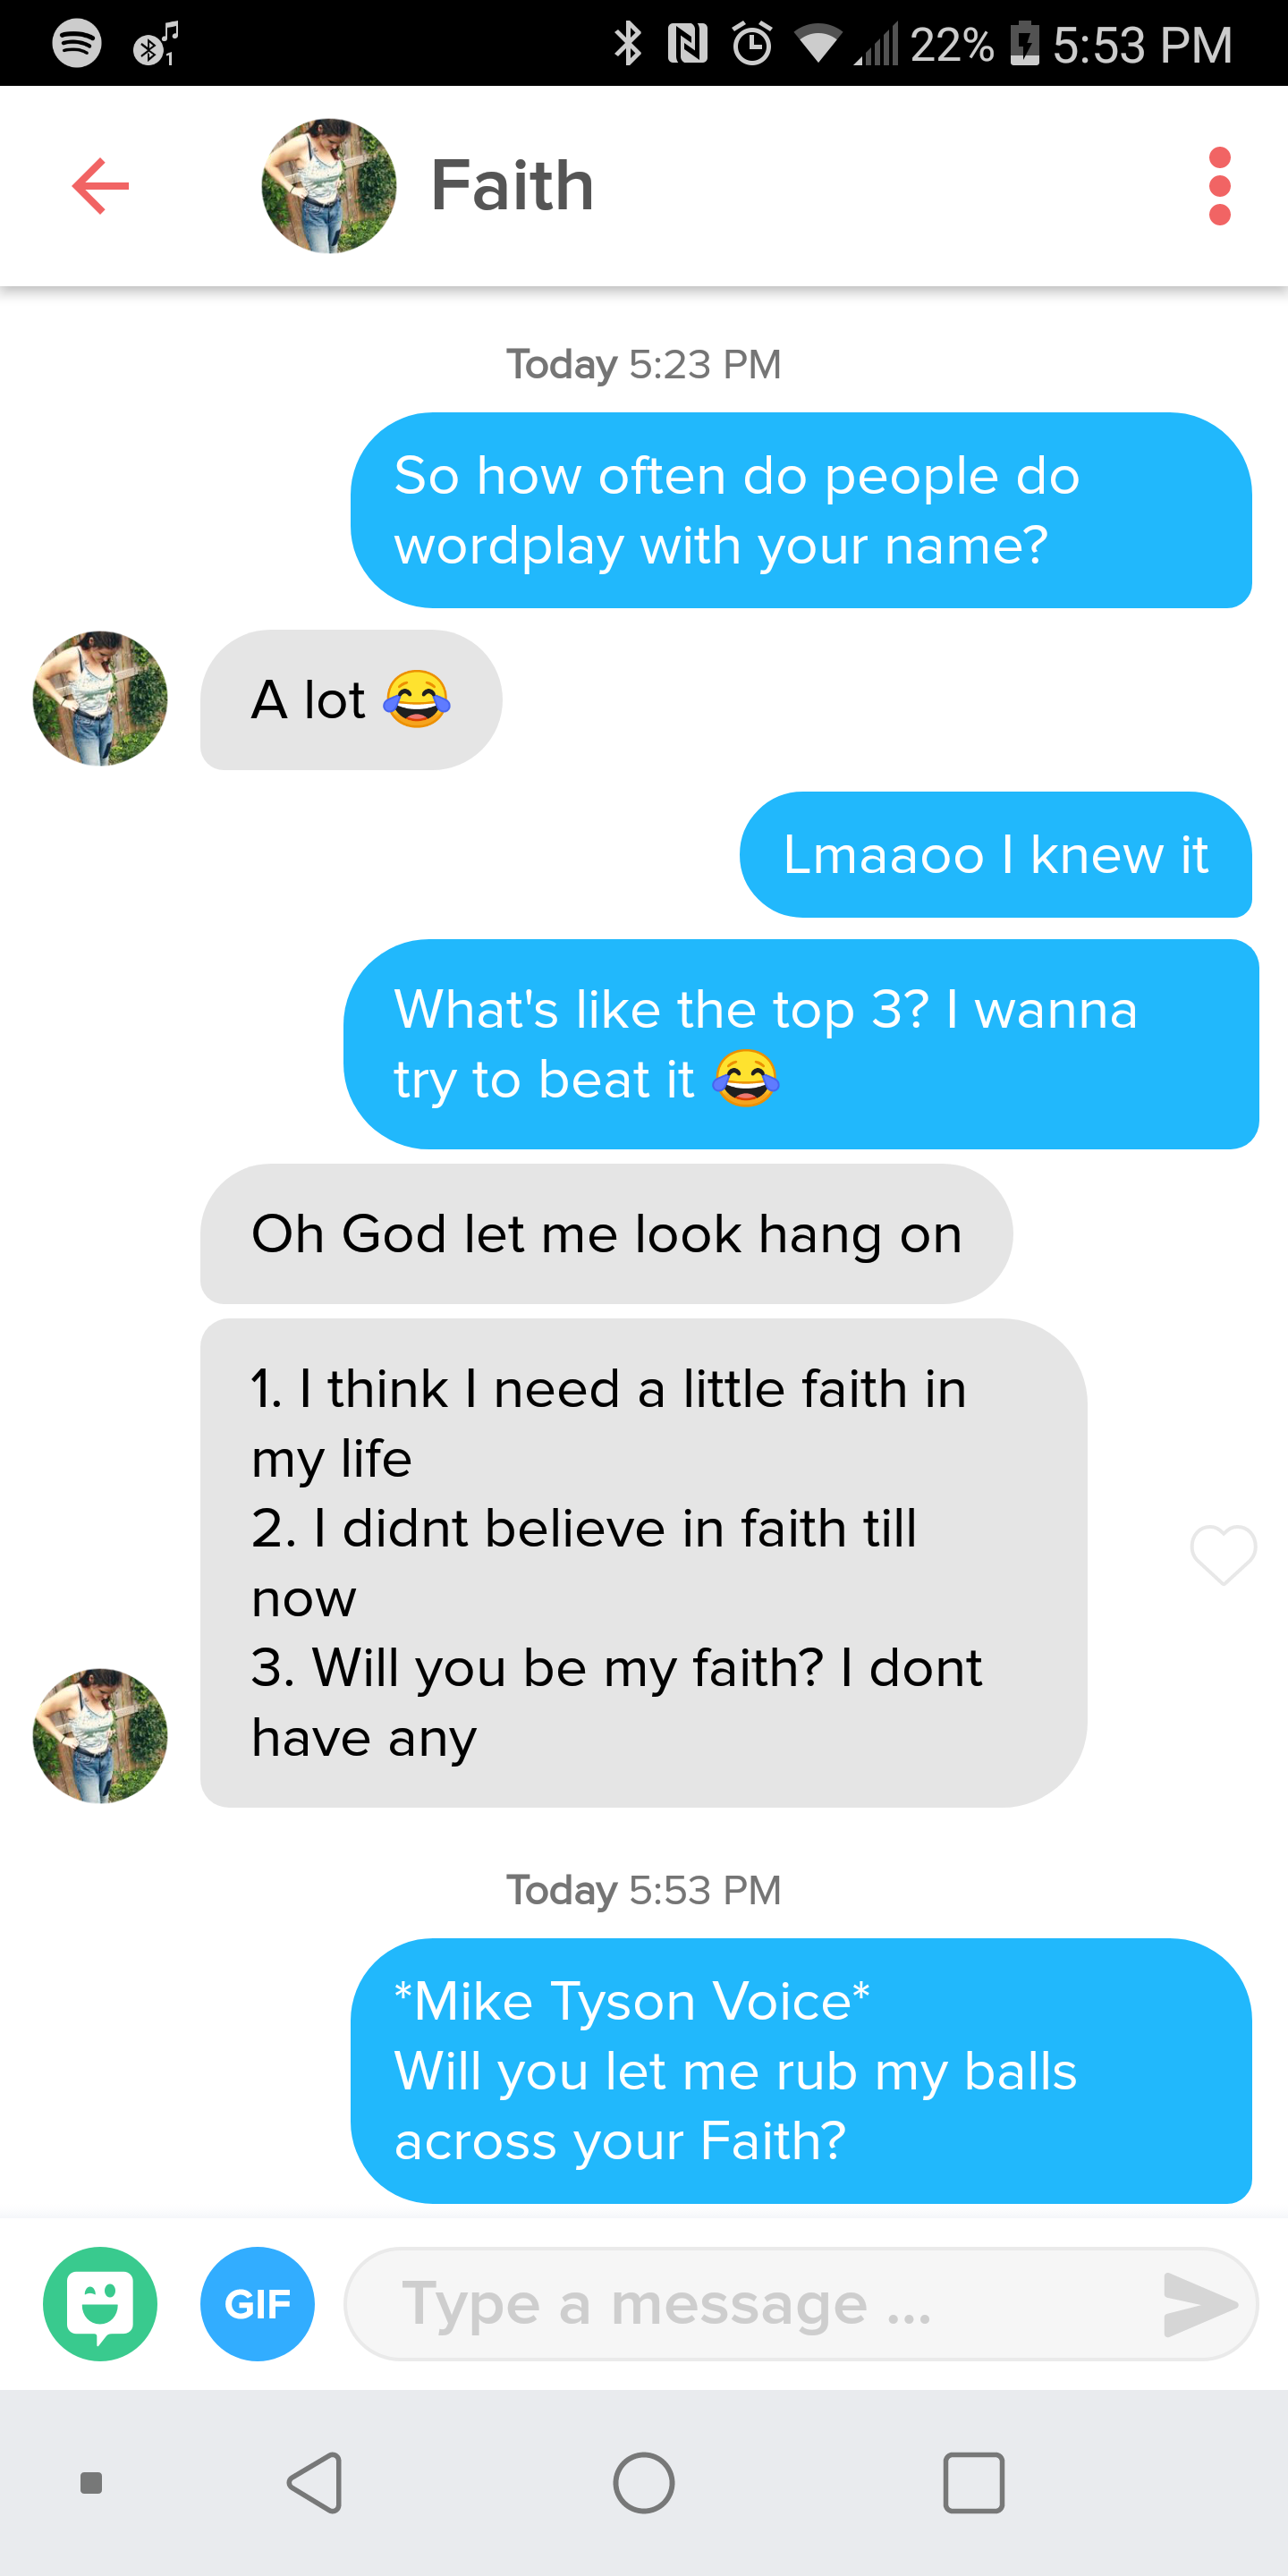 random pics - mike tyson faith tinder - N 21 22% Faith Today So how often do people do wordplay with your name? A lot Lmaaoo I knew it What's the top 3? I wanna try to beat it Oh God let me look hang on 1. I think I need a little faith in my life 2. I did